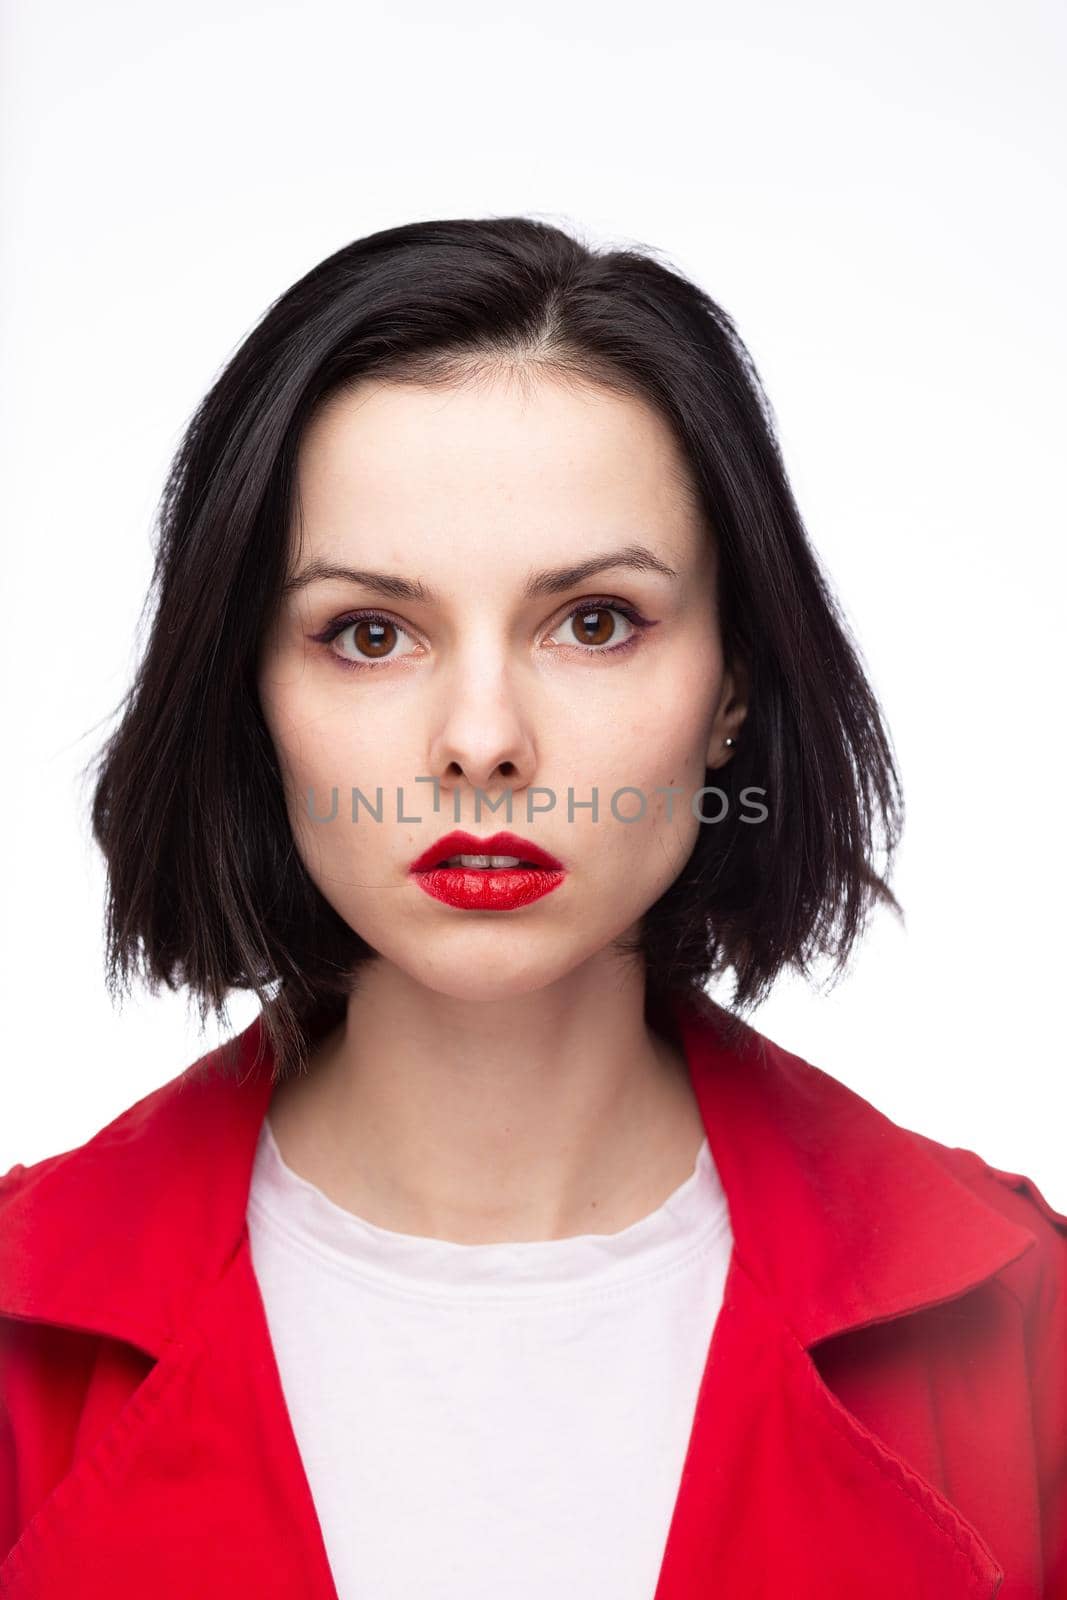 brunette woman in white t-shirt, red jacket. High quality photo